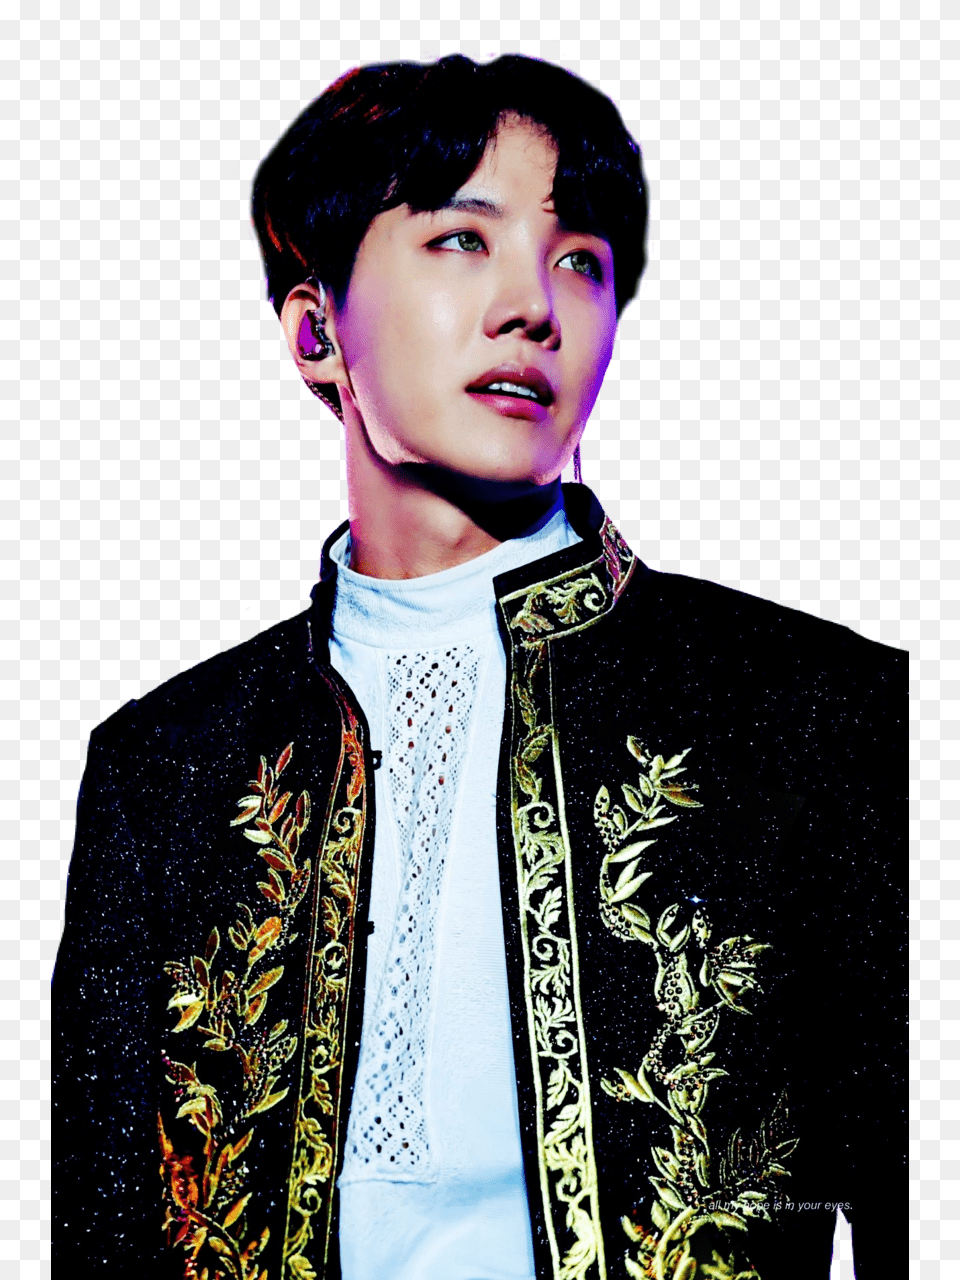 Bts Jhope And Hoseok Image Hoseok Prince, Male, Person, Head, Formal Wear Png